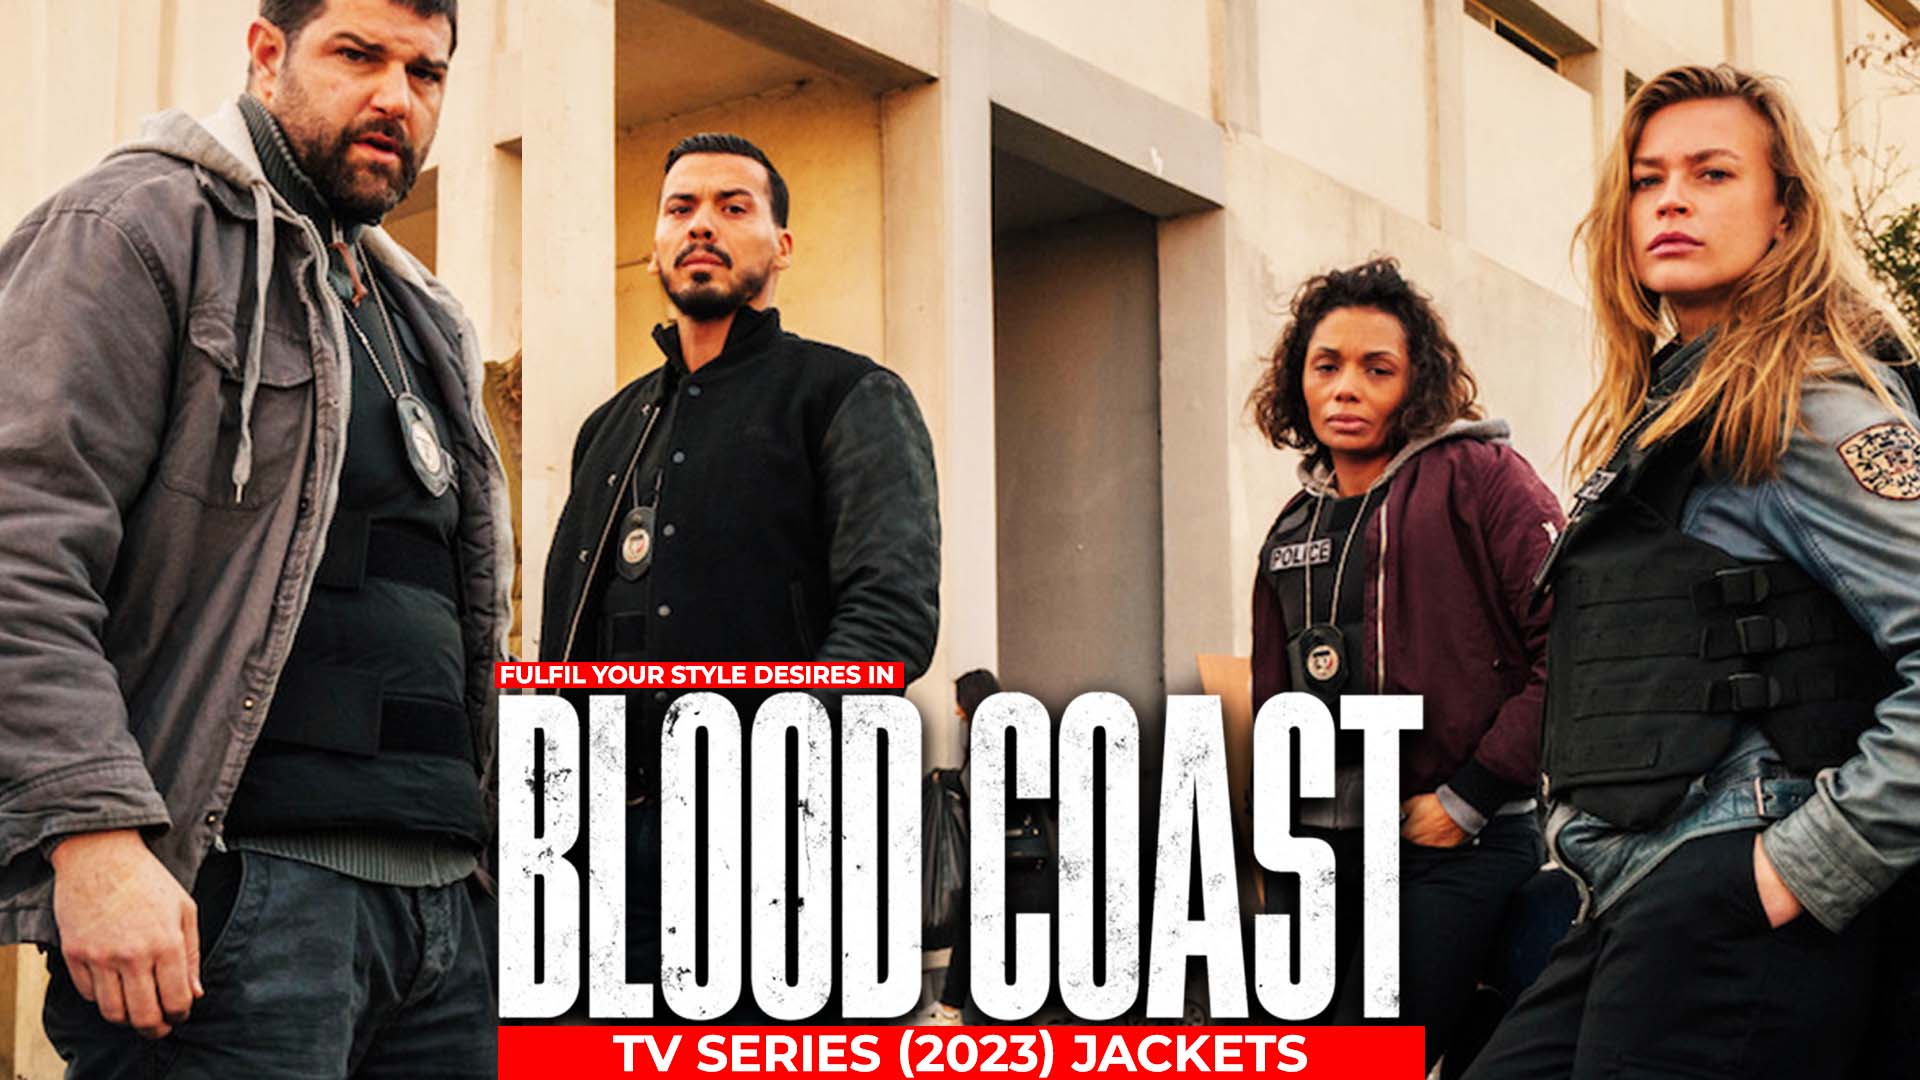 Fulfil Your Style Desires In Blood Coast Tv Series (2023) Jackets